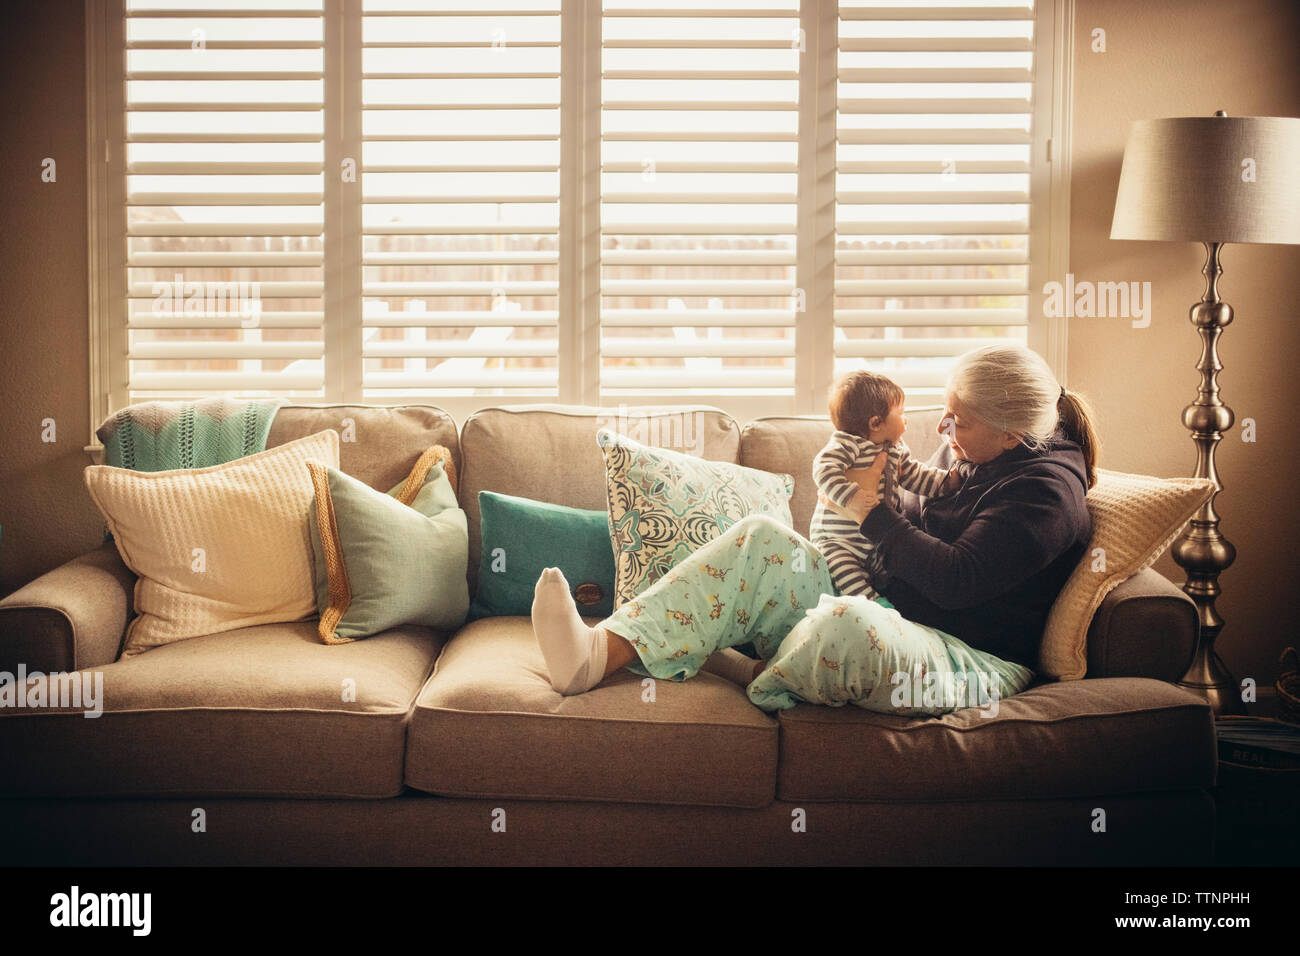 Grandmother playing with baby grandson on sofa against window Stock Photo